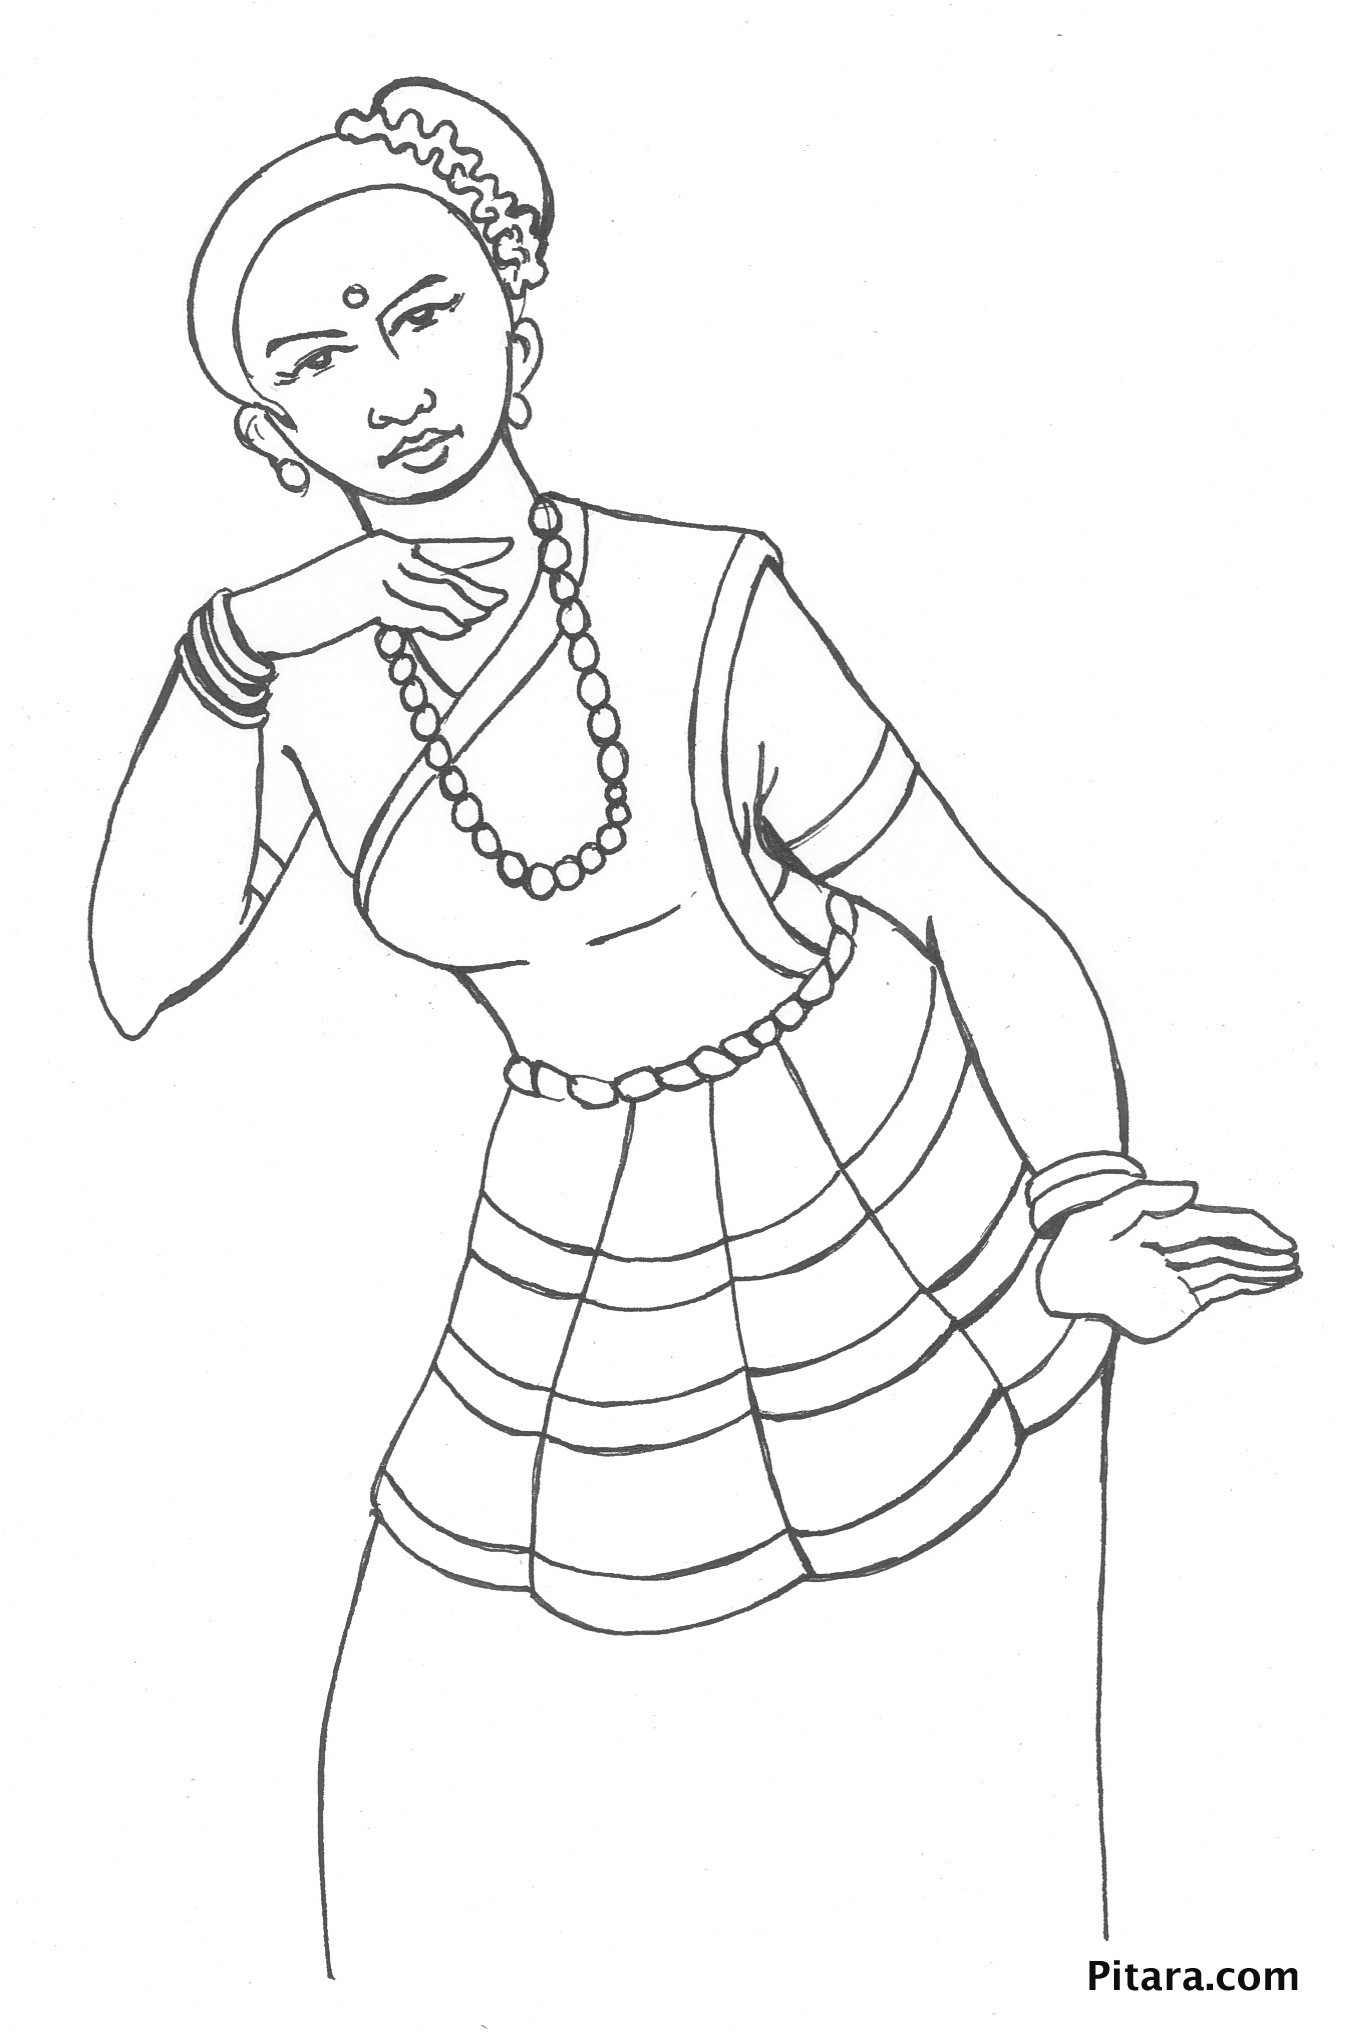 Dance Coloring Pages For Kids
 Dancing Styles Coloring Pages